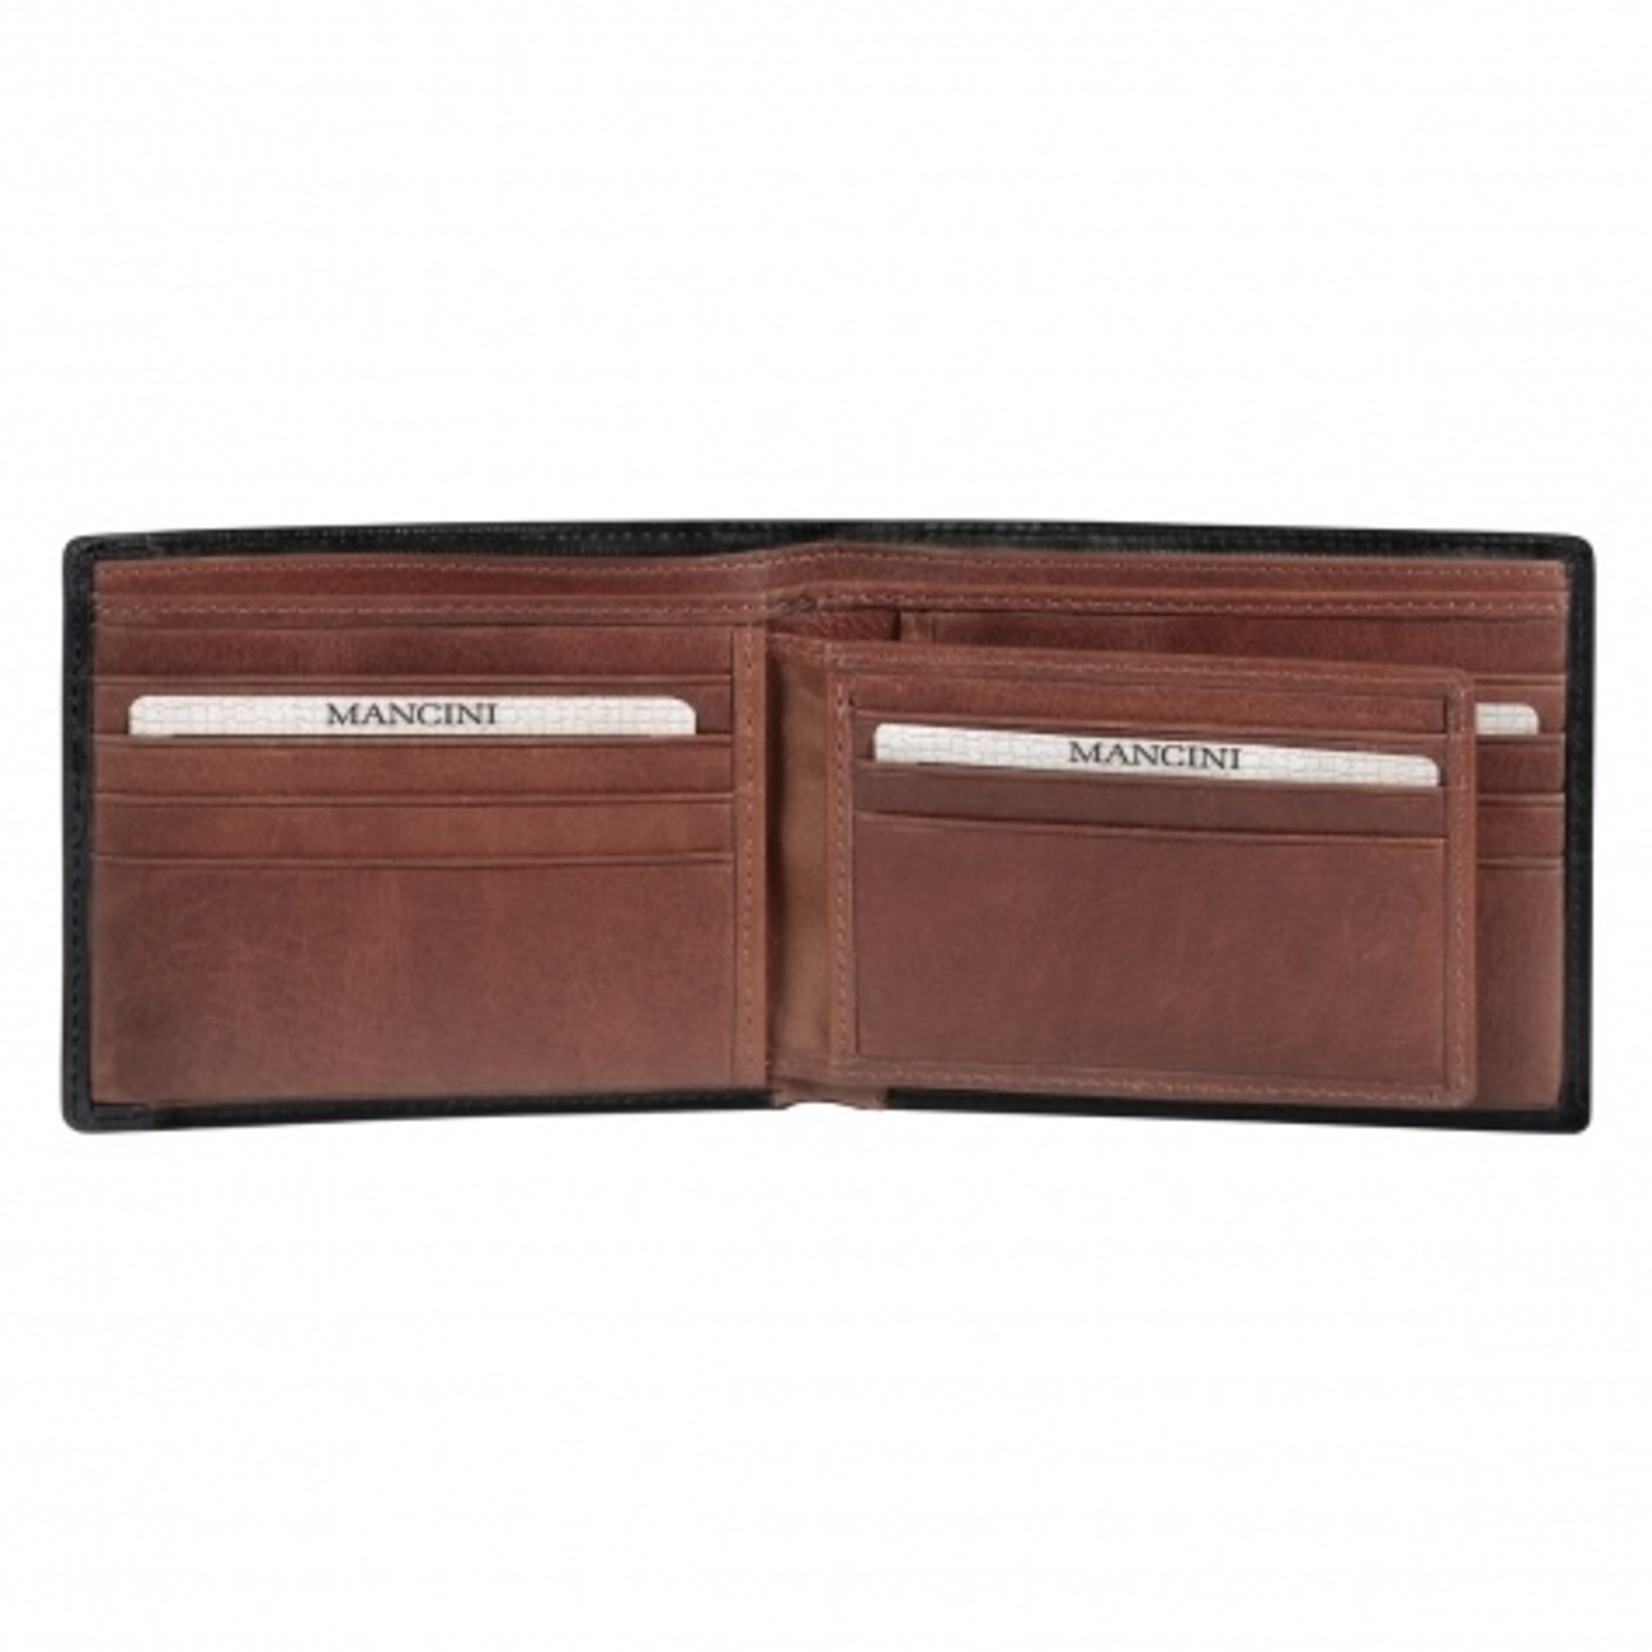 Mancini Men’s RFID Blocking Billfold with Removable Passcase